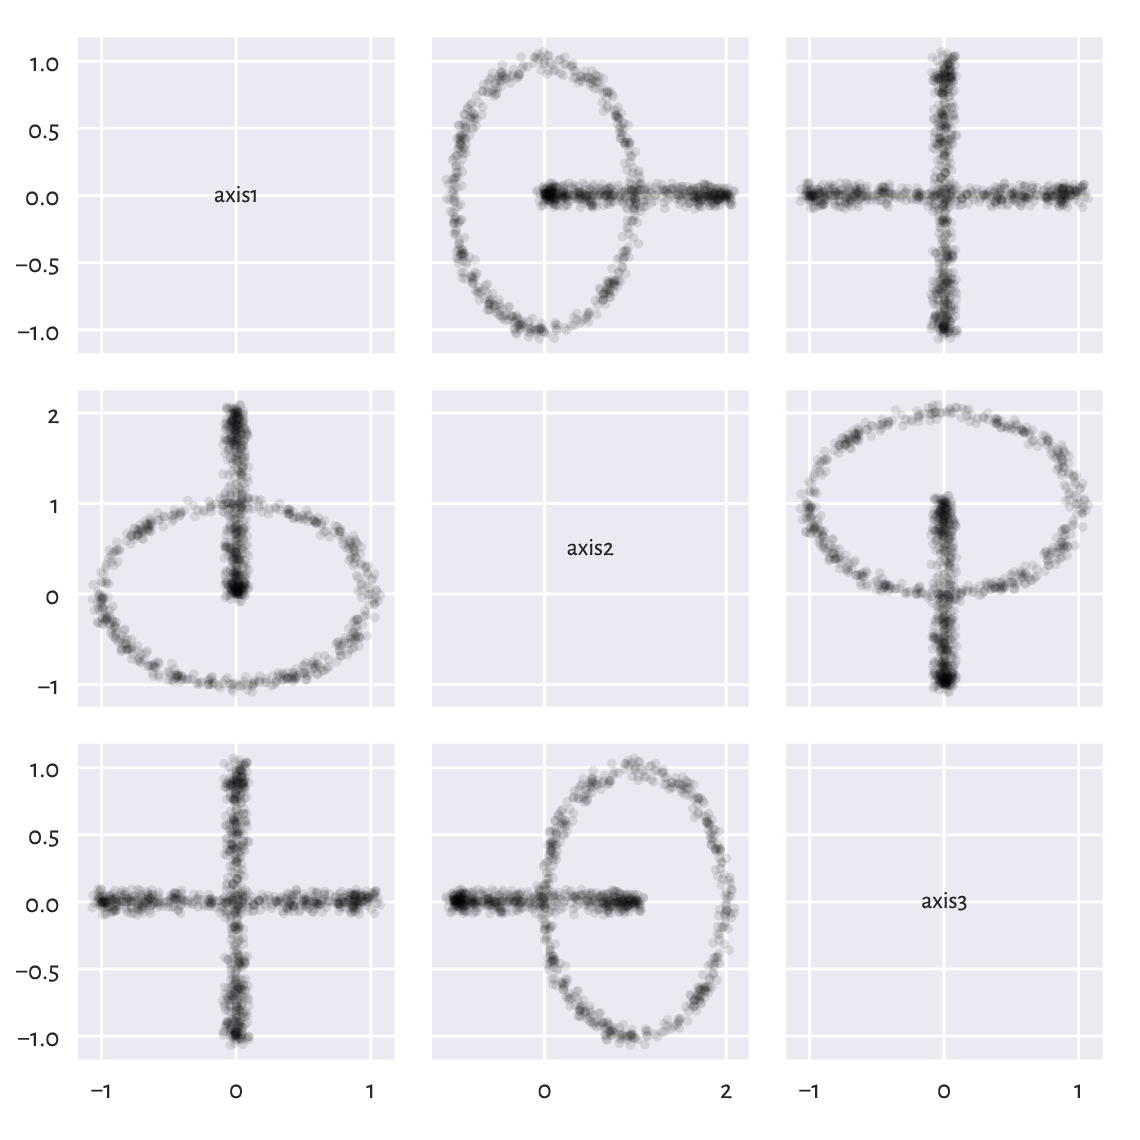 ../_images/chainlink-pairplot-37.png